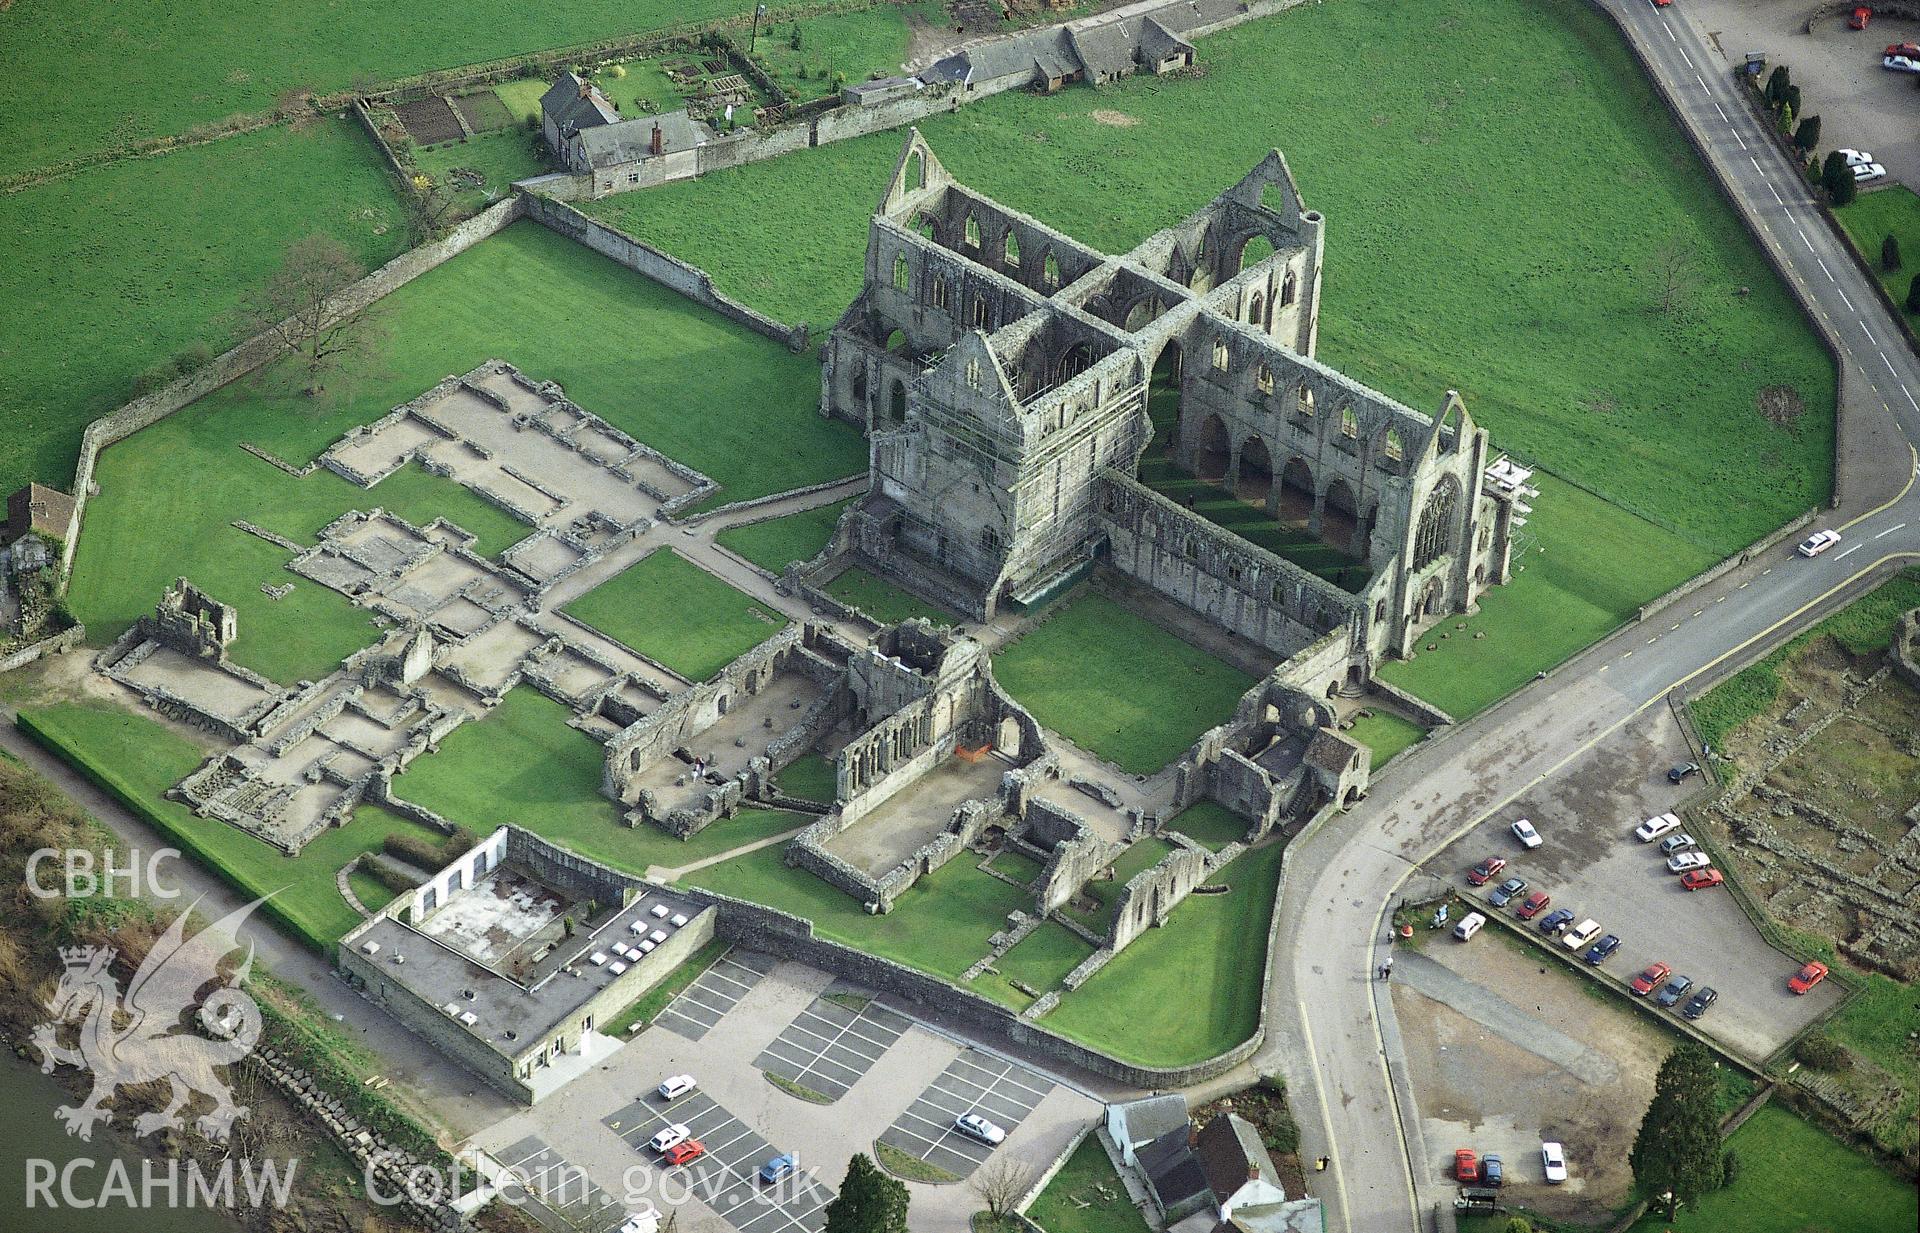 RCAHMW colour slide oblique aerial photograph of Tintern Abbey, Tintern, taken by C.R. Musson, 24/03/94